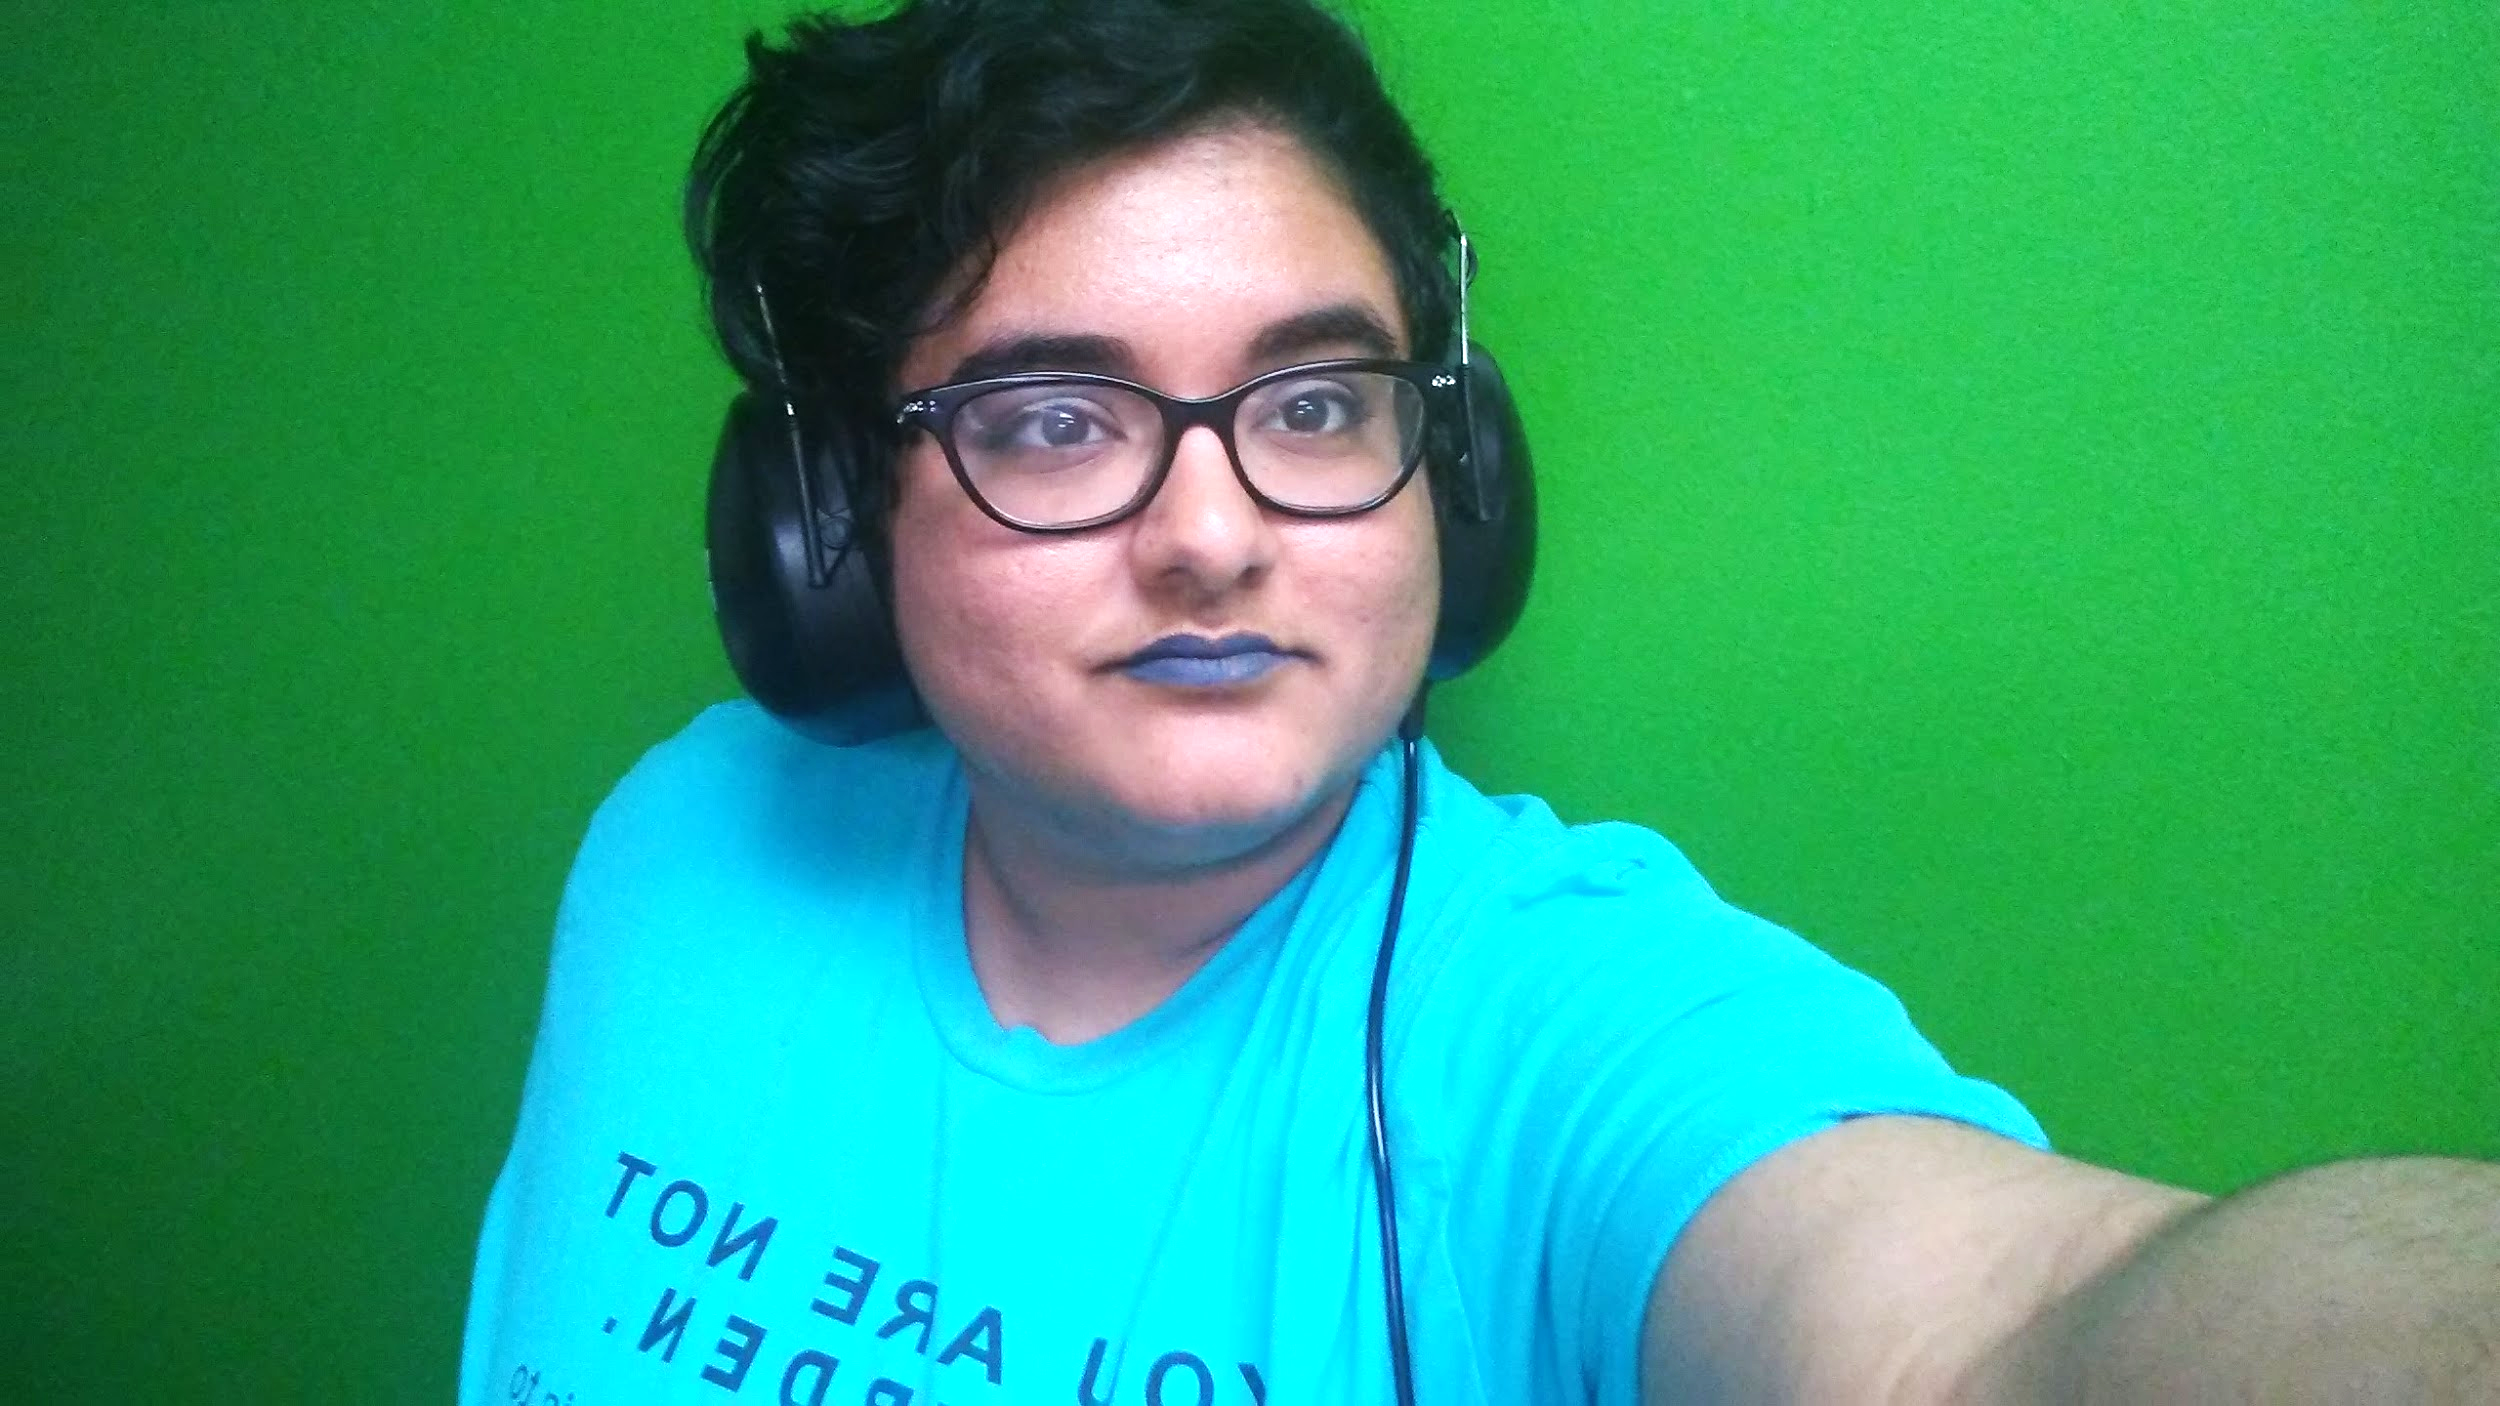 Image is Noor, a tan autistic person with blue lipstick, wearing big headphones